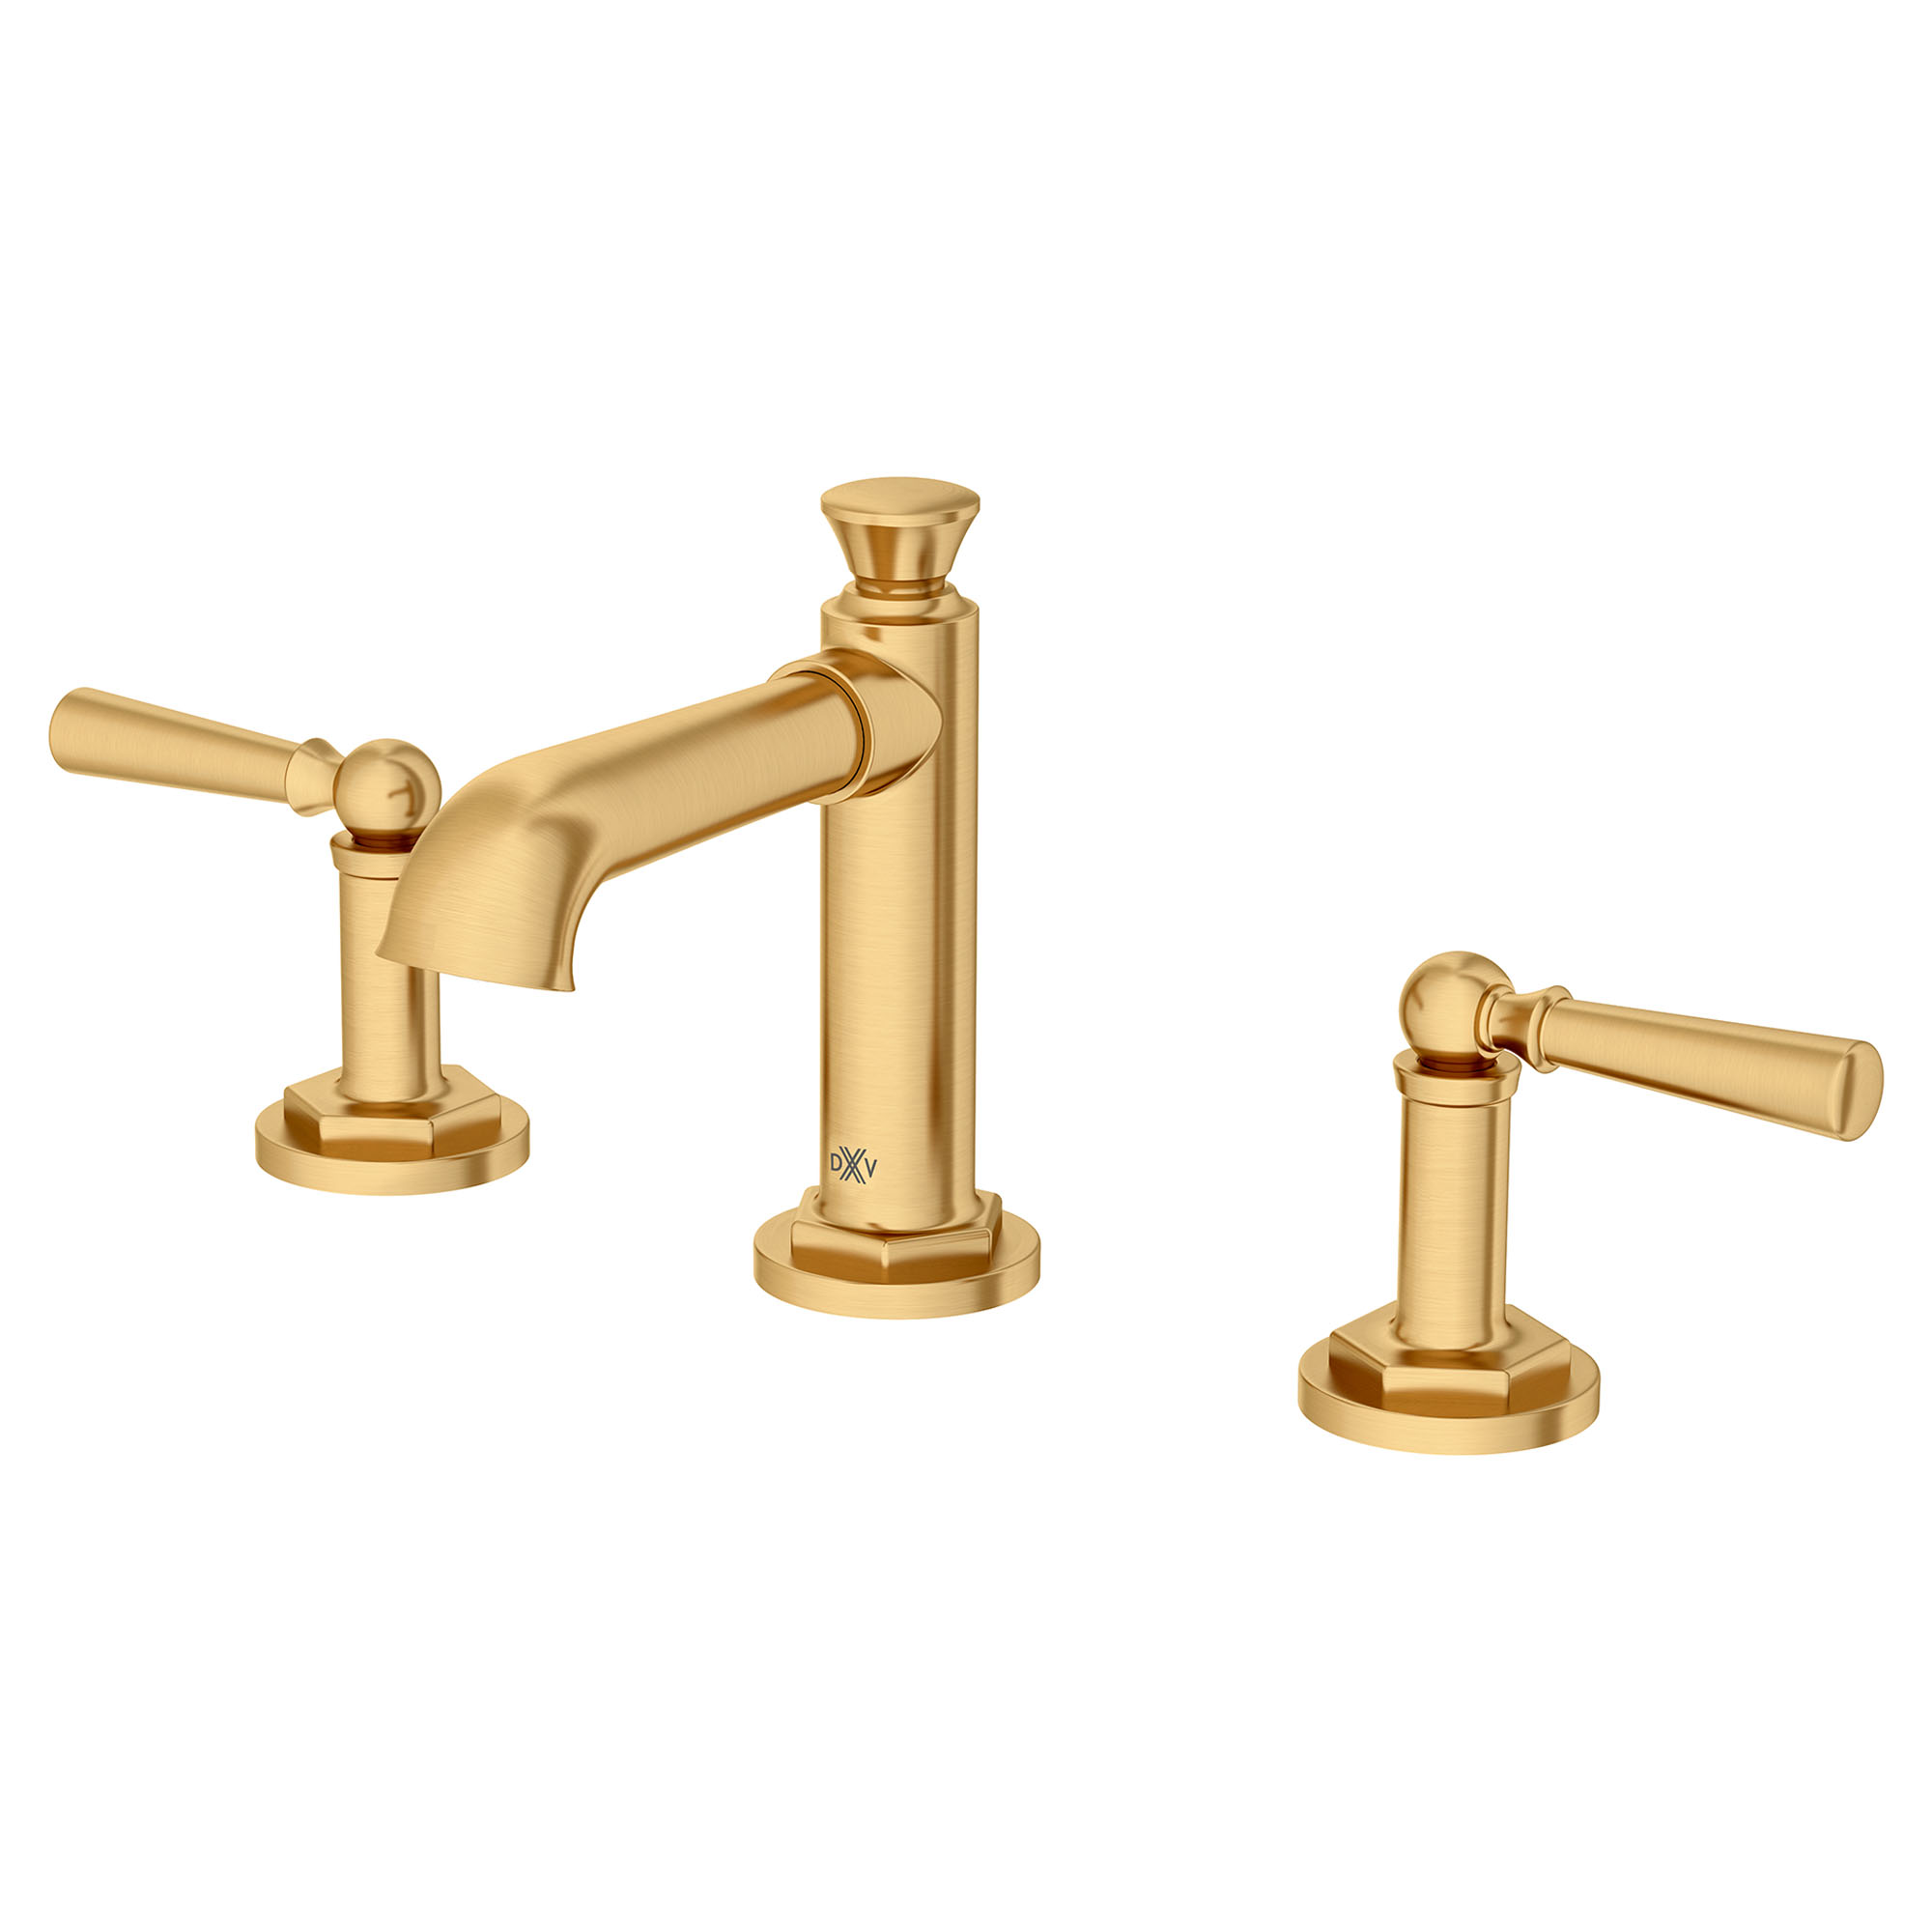 Oak Hill™ High Spout Widespread With Lever Handles